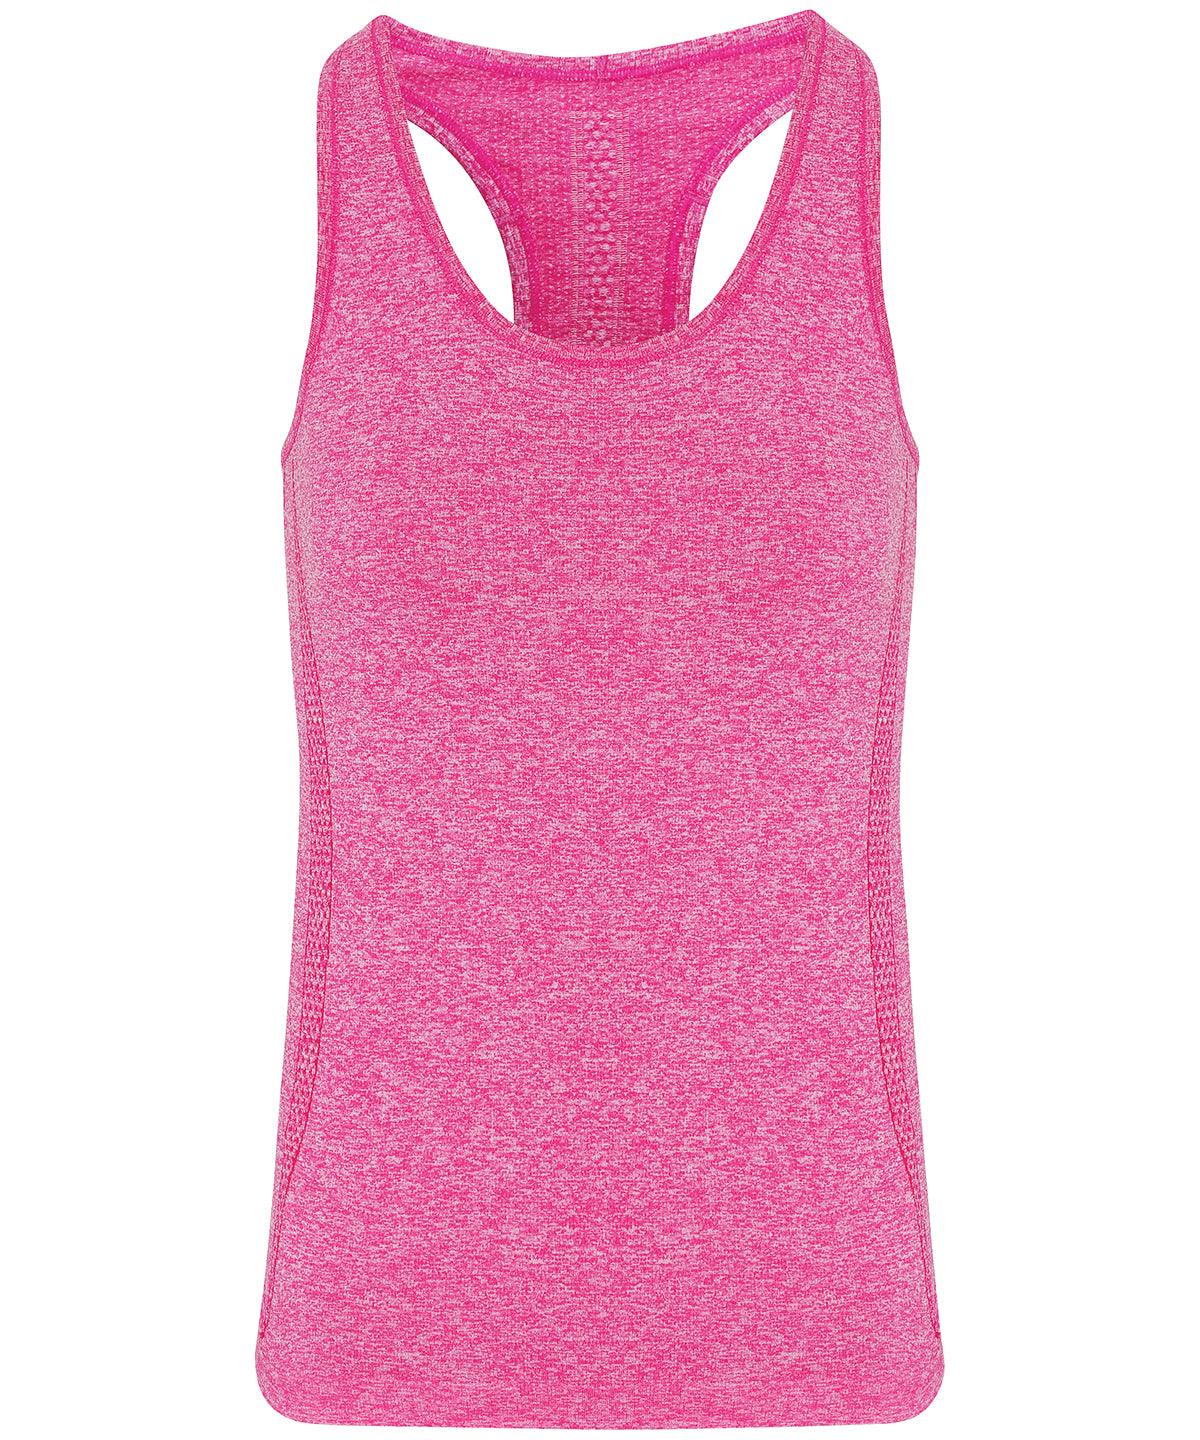 Pink - Women's TriDri® seamless '3D fit' multi-sport sculpt vest Vests TriDri® Activewear & Performance, Back to the Gym, Co-ords, Exclusives, Gymwear, Must Haves, New Colours For 2022, Rebrandable, Sports & Leisure, T-Shirts & Vests Schoolwear Centres